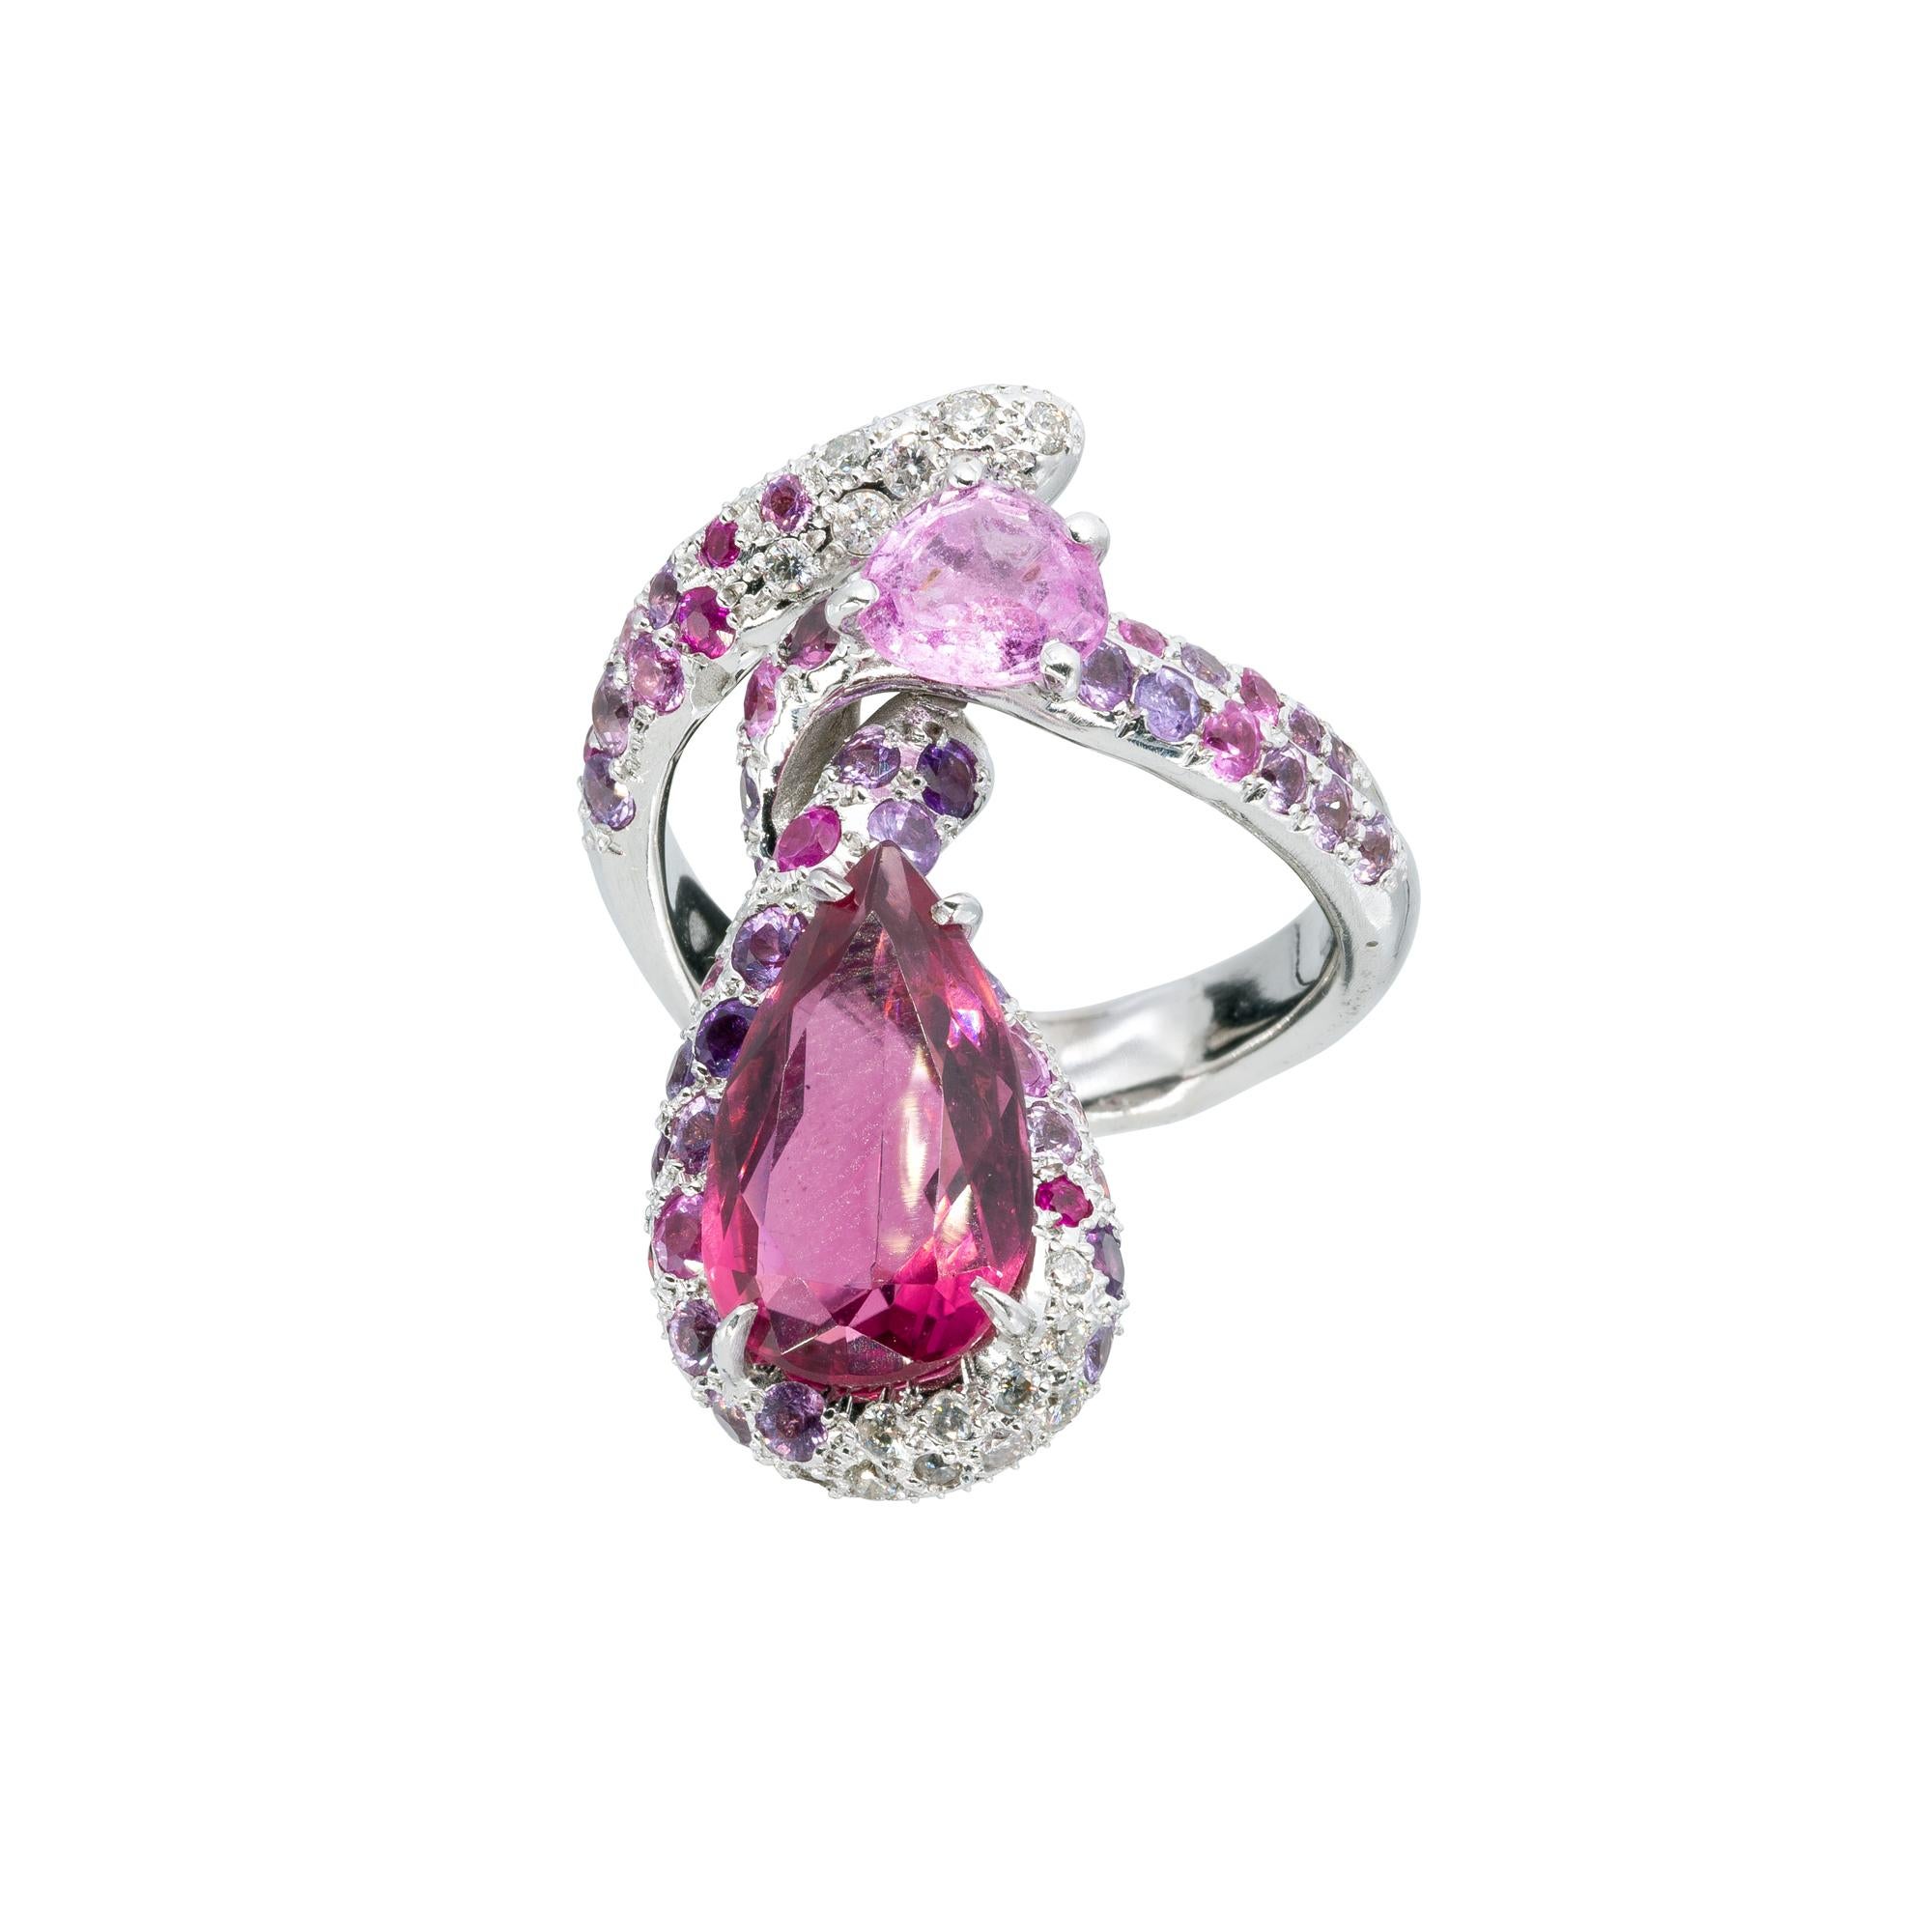 A d'Avossa Ring ìn white 18 kt gold with a central pear shape pink tourmaline  cts 4.45, and a contour of a pink sapphire cts 1.05, and a pavé of white diiamonds cts 0.30 and pink sapphires cts 1.95
A Unique piece


Ref. Number ATR00659

